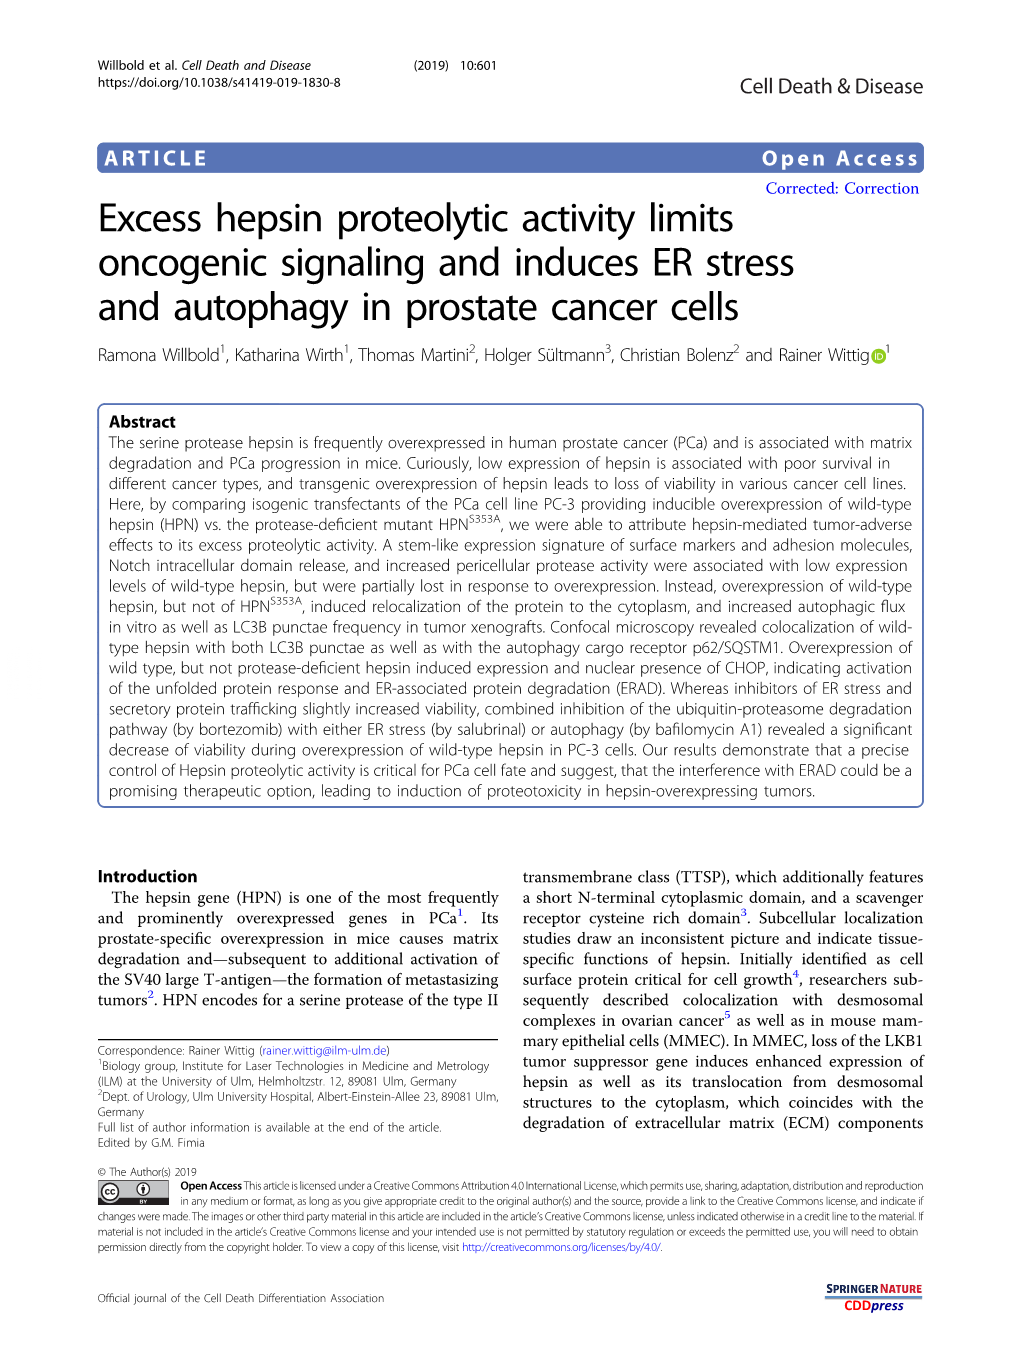 Excess Hepsin Proteolytic Activity Limits Oncogenic Signaling and Induces